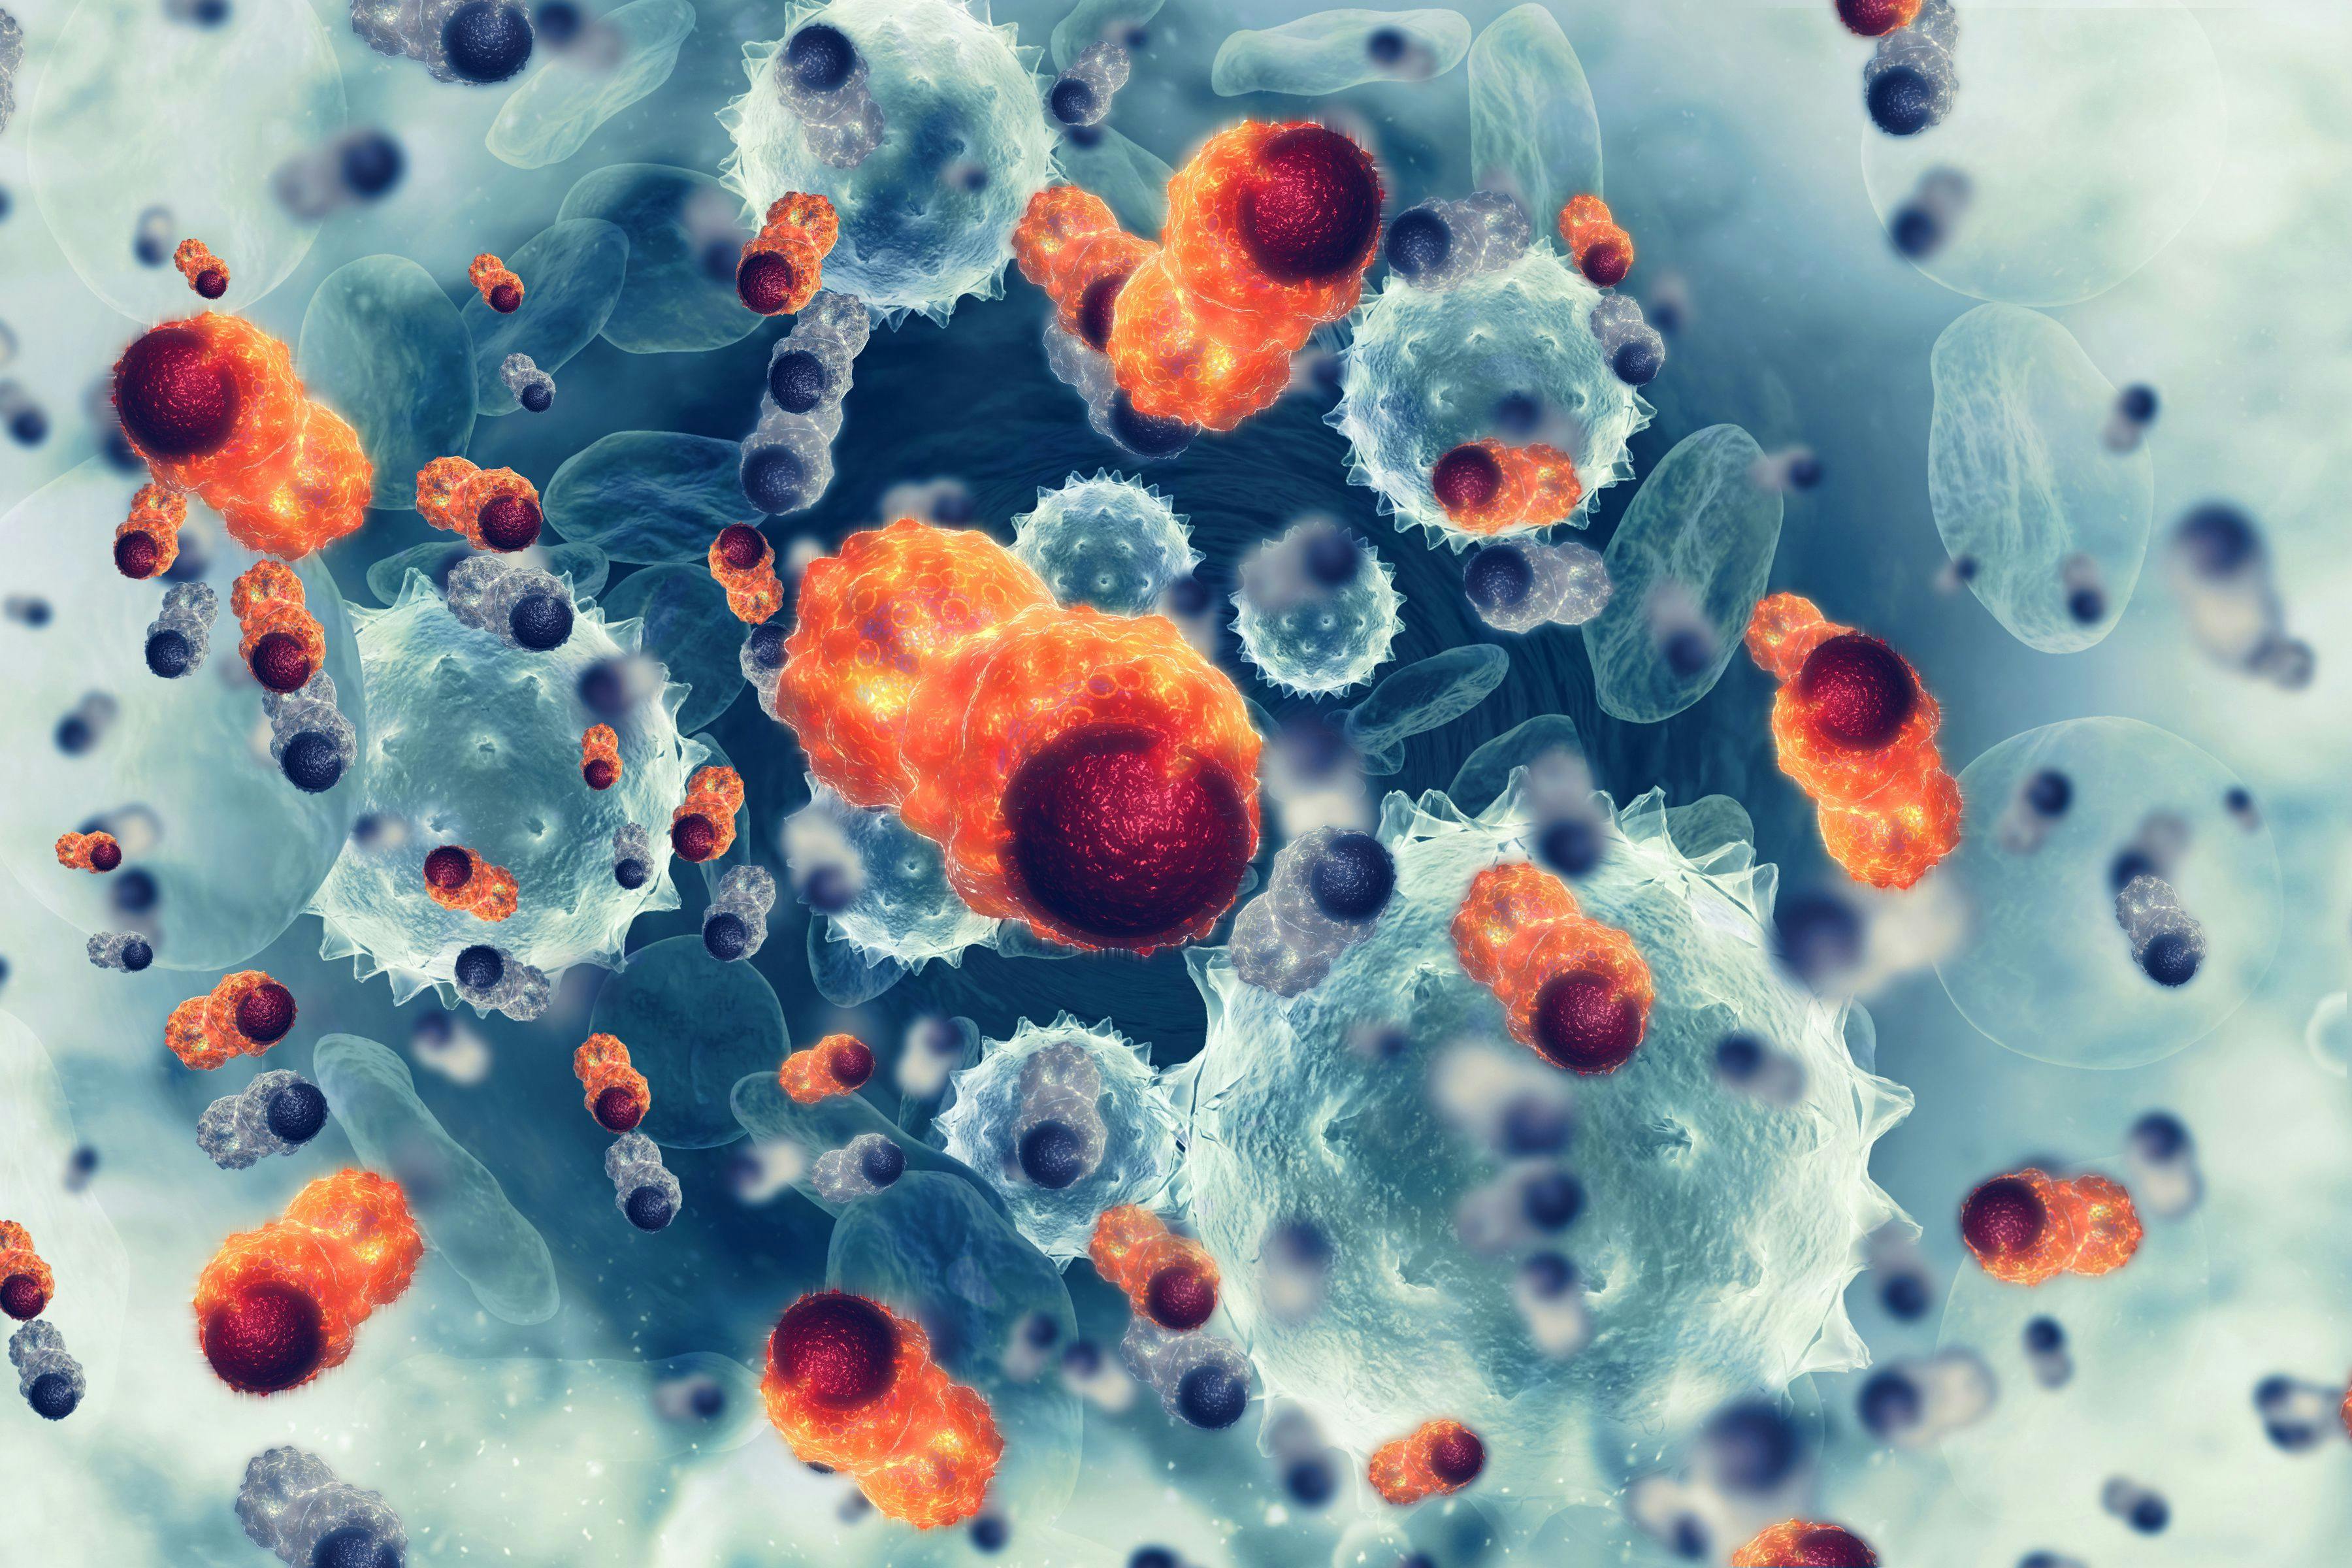 Immunological Status Affects Efficacy of Mogamulizumab in ATL, Study Finds